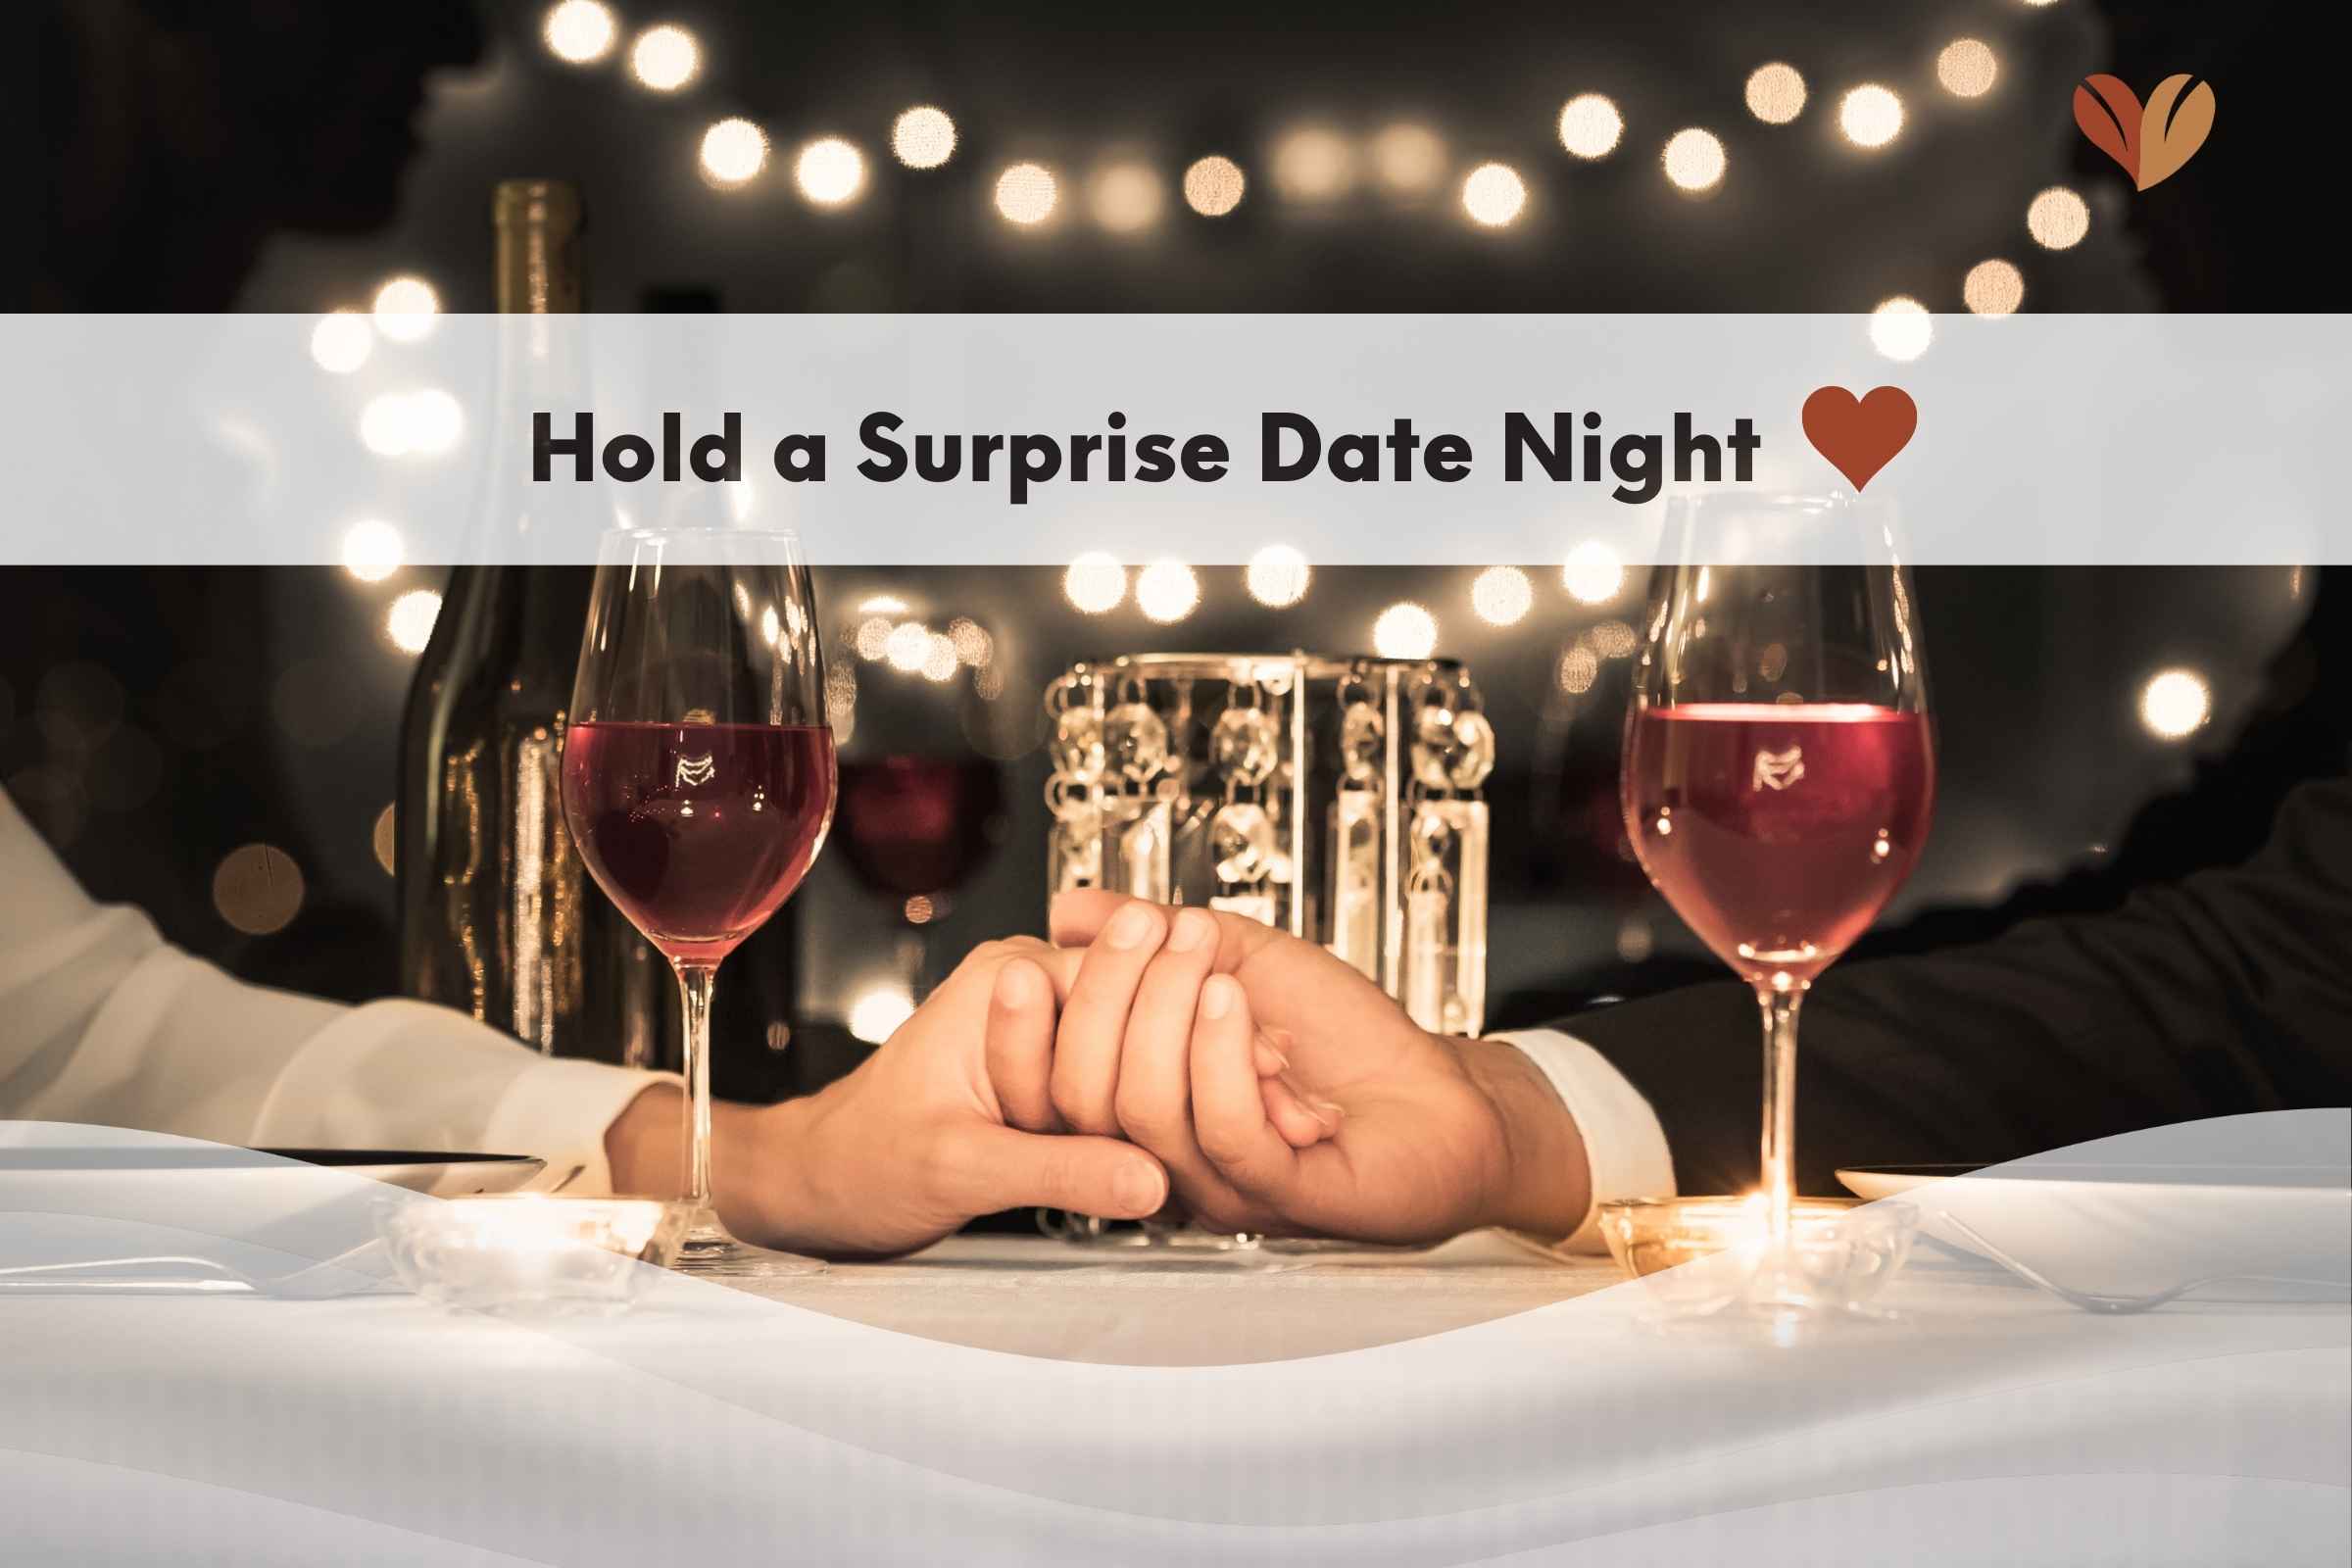 Hold a surprise date night